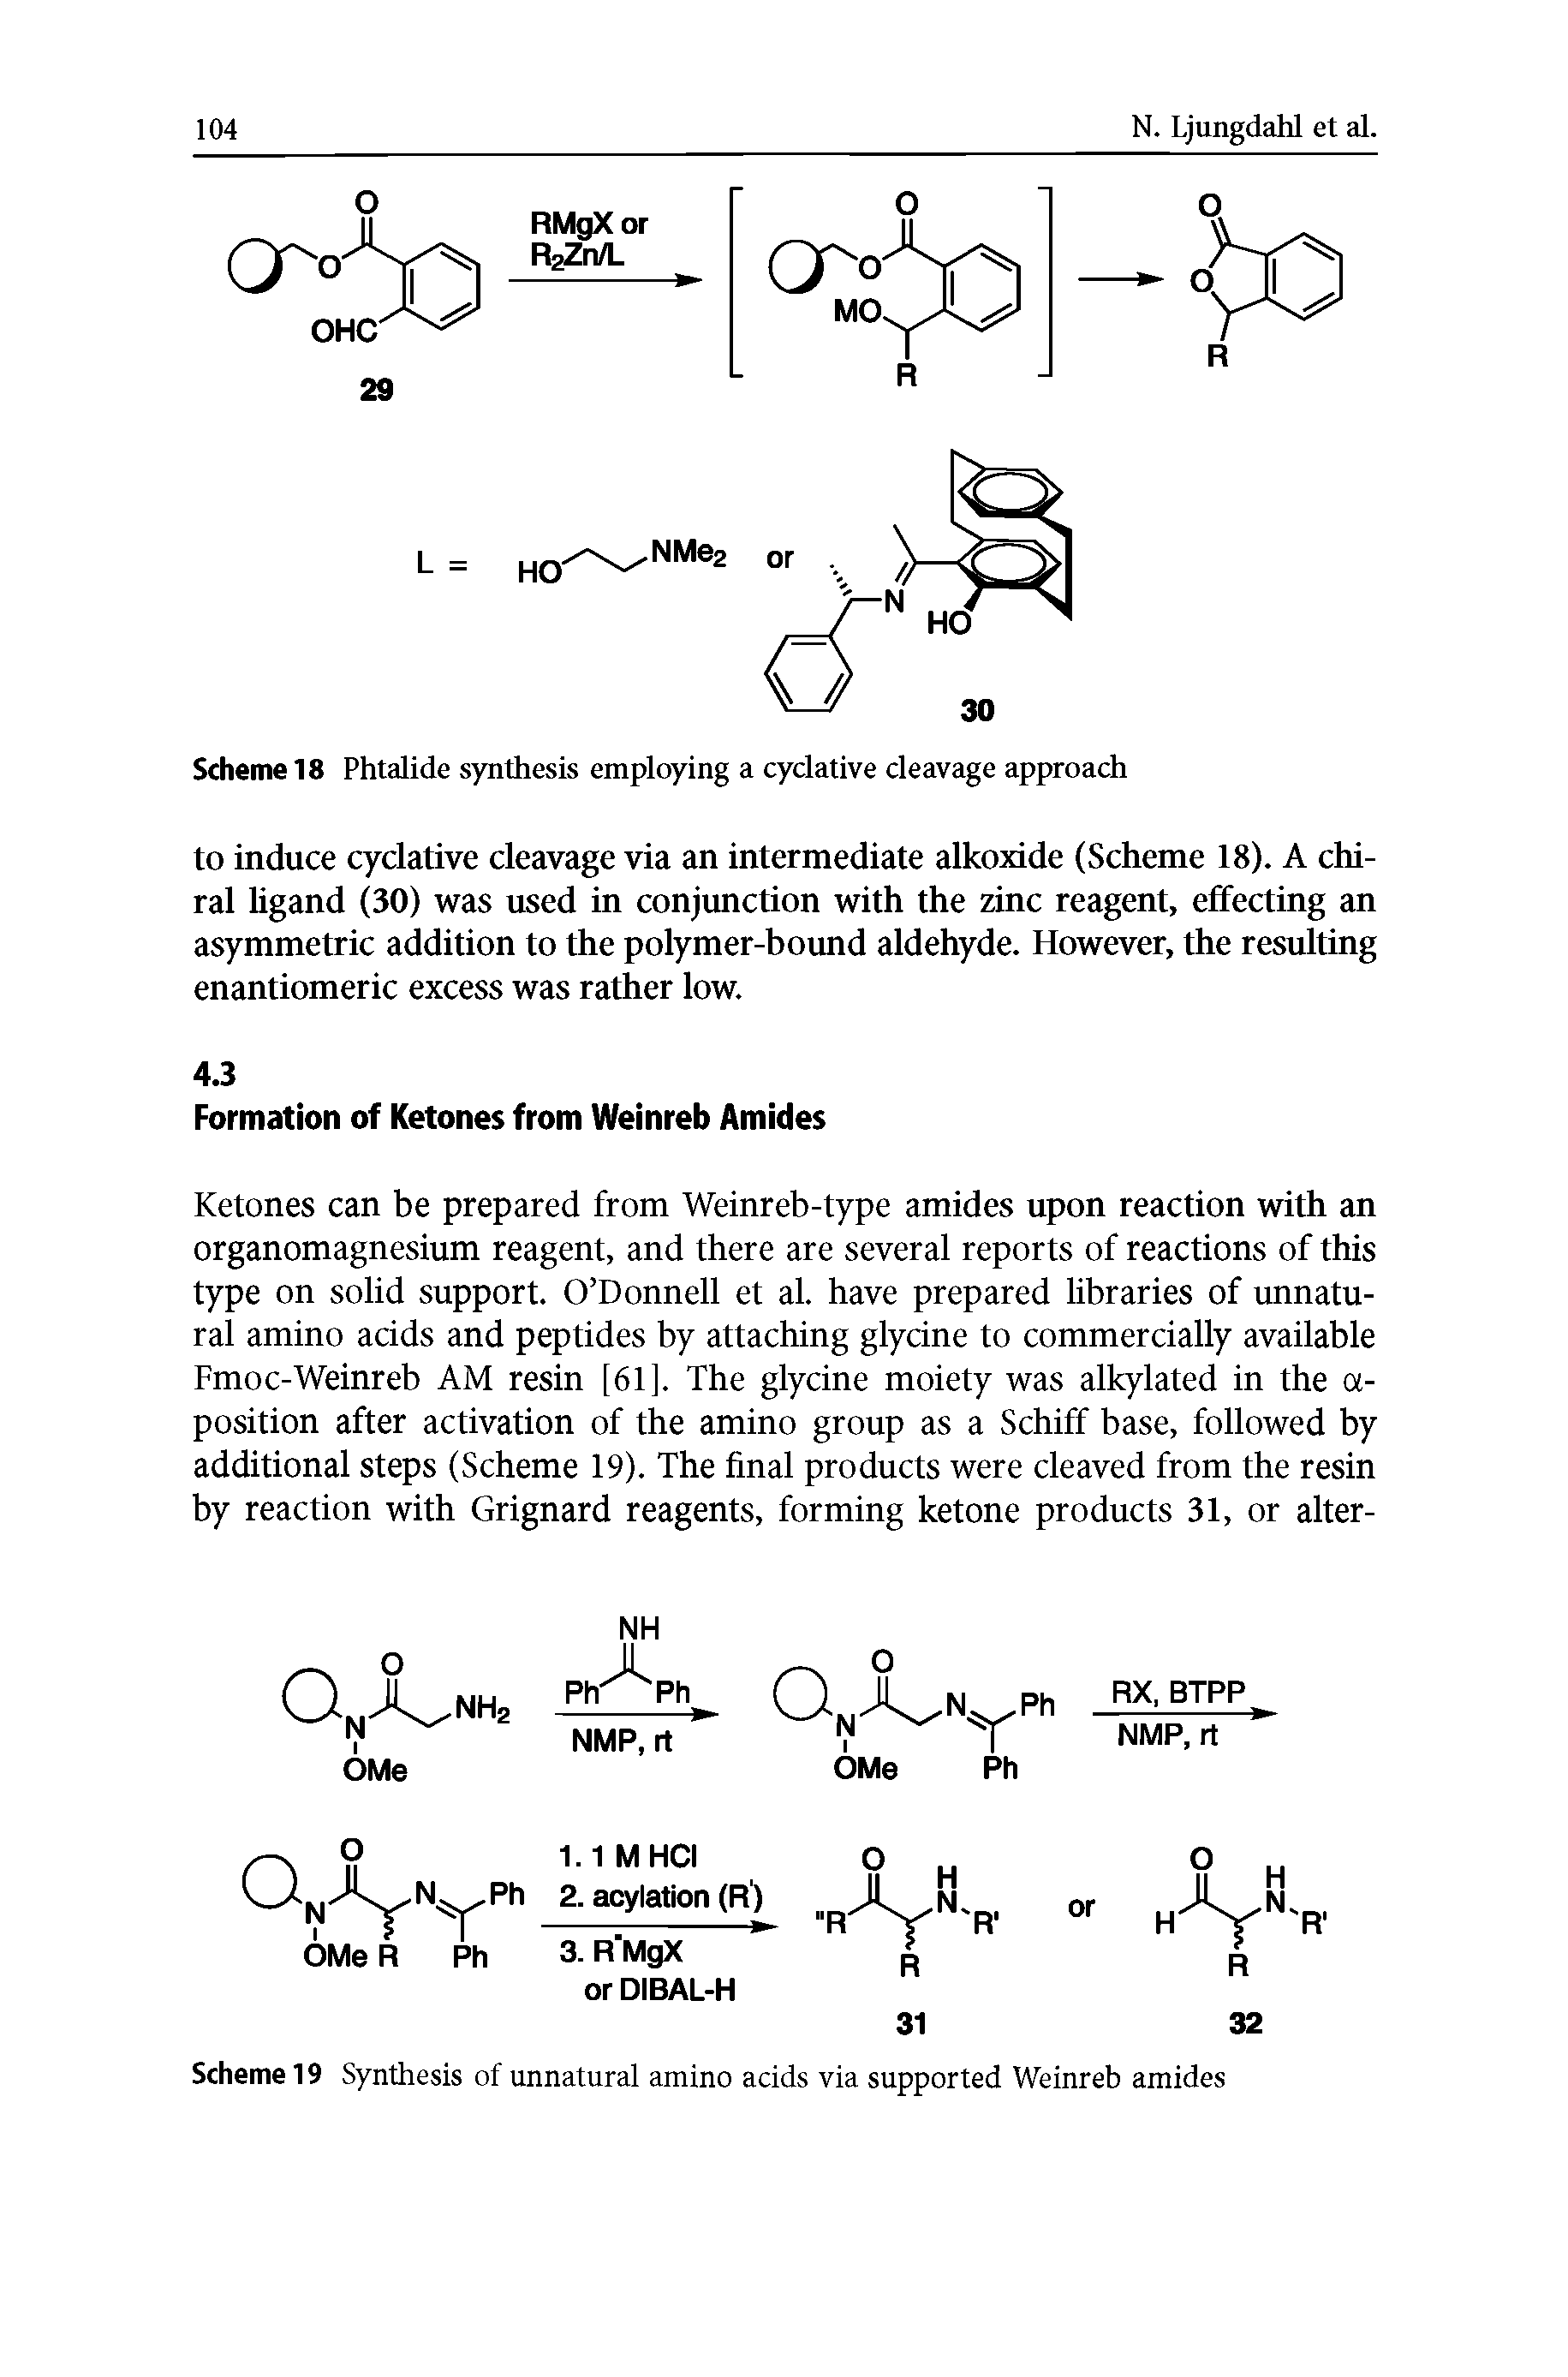 Scheme 19 Synthesis of unnatural amino acids via supported Weinreb amides...